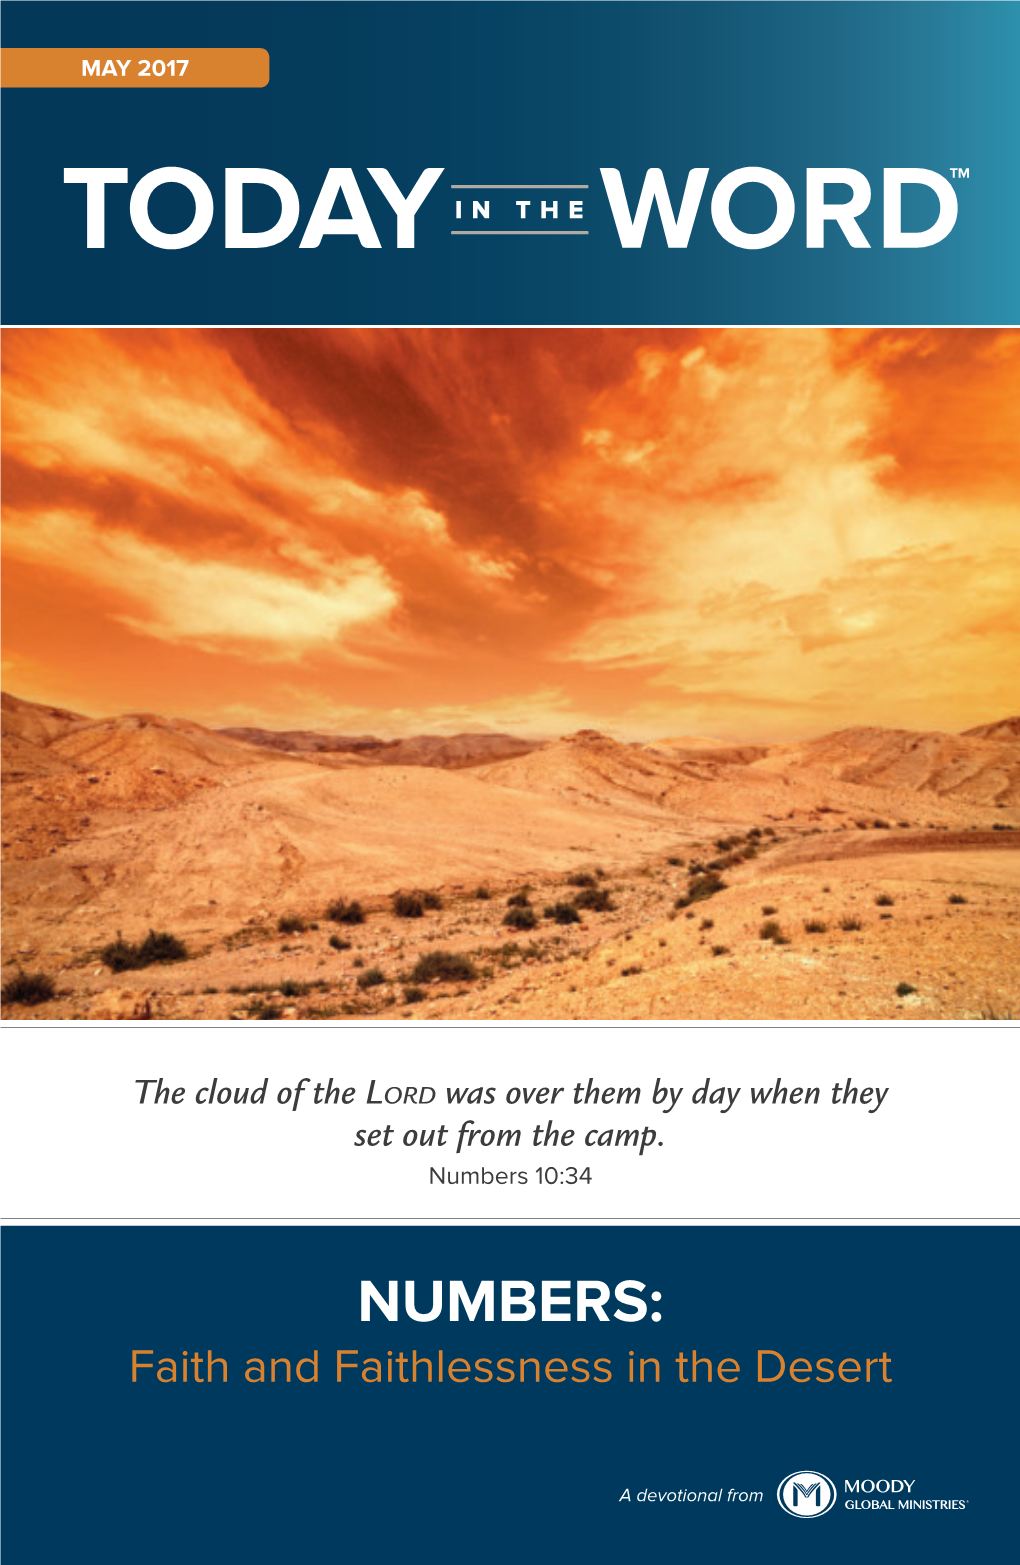 NUMBERS: Faith and Faithlessness in the Desert